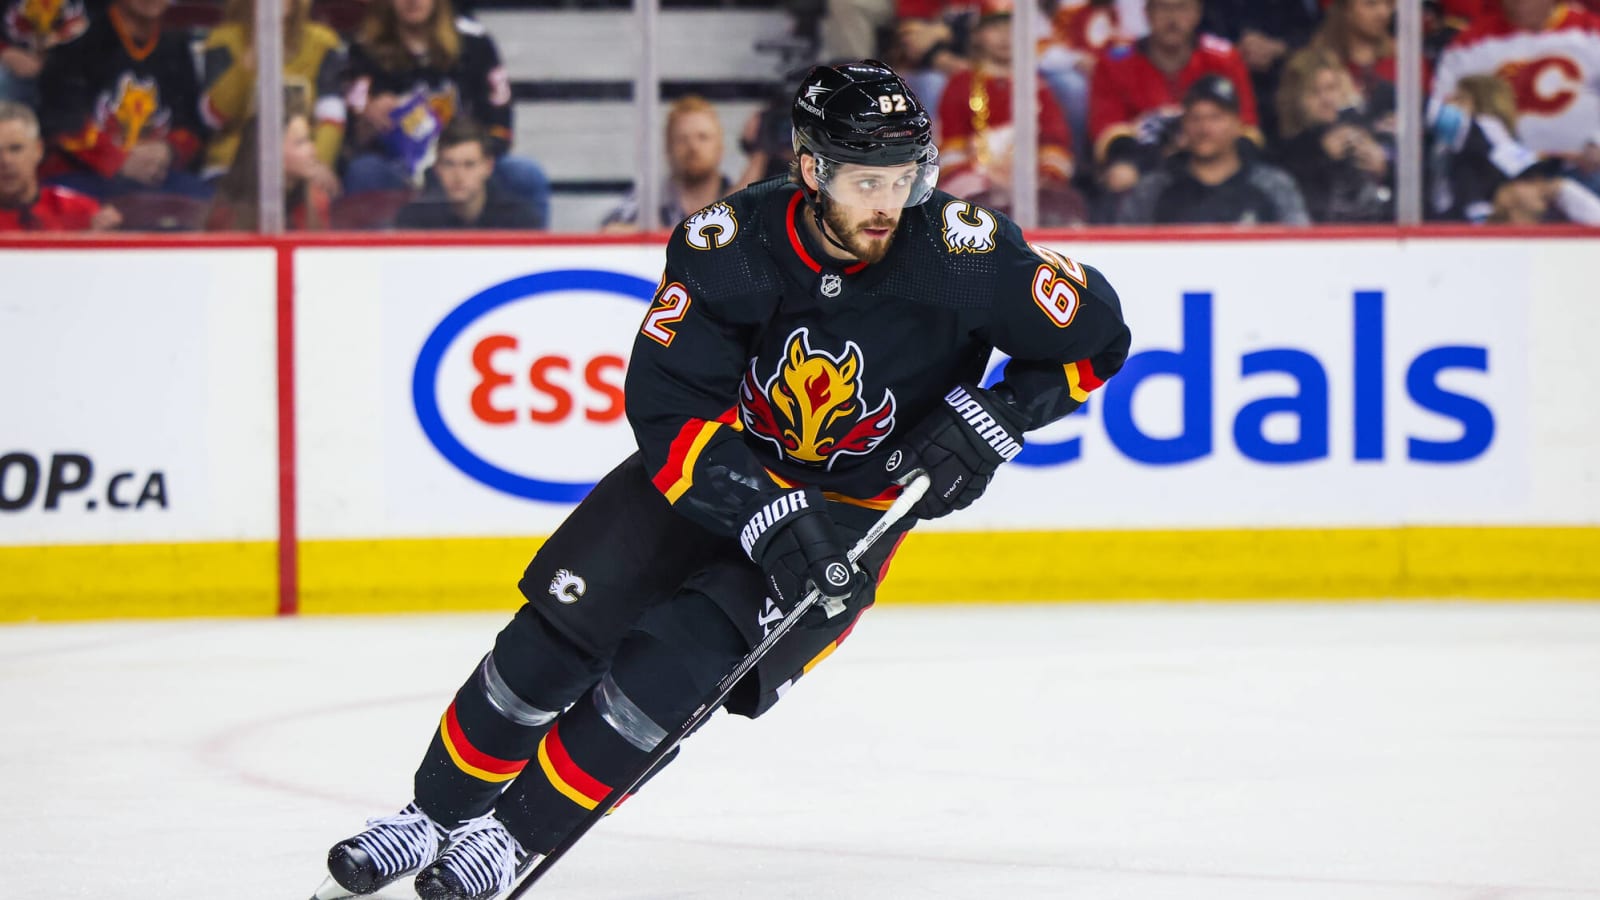 Flames Daily: Miromanov and Wolf Shining, Daniel Briere’s Johansen Problem